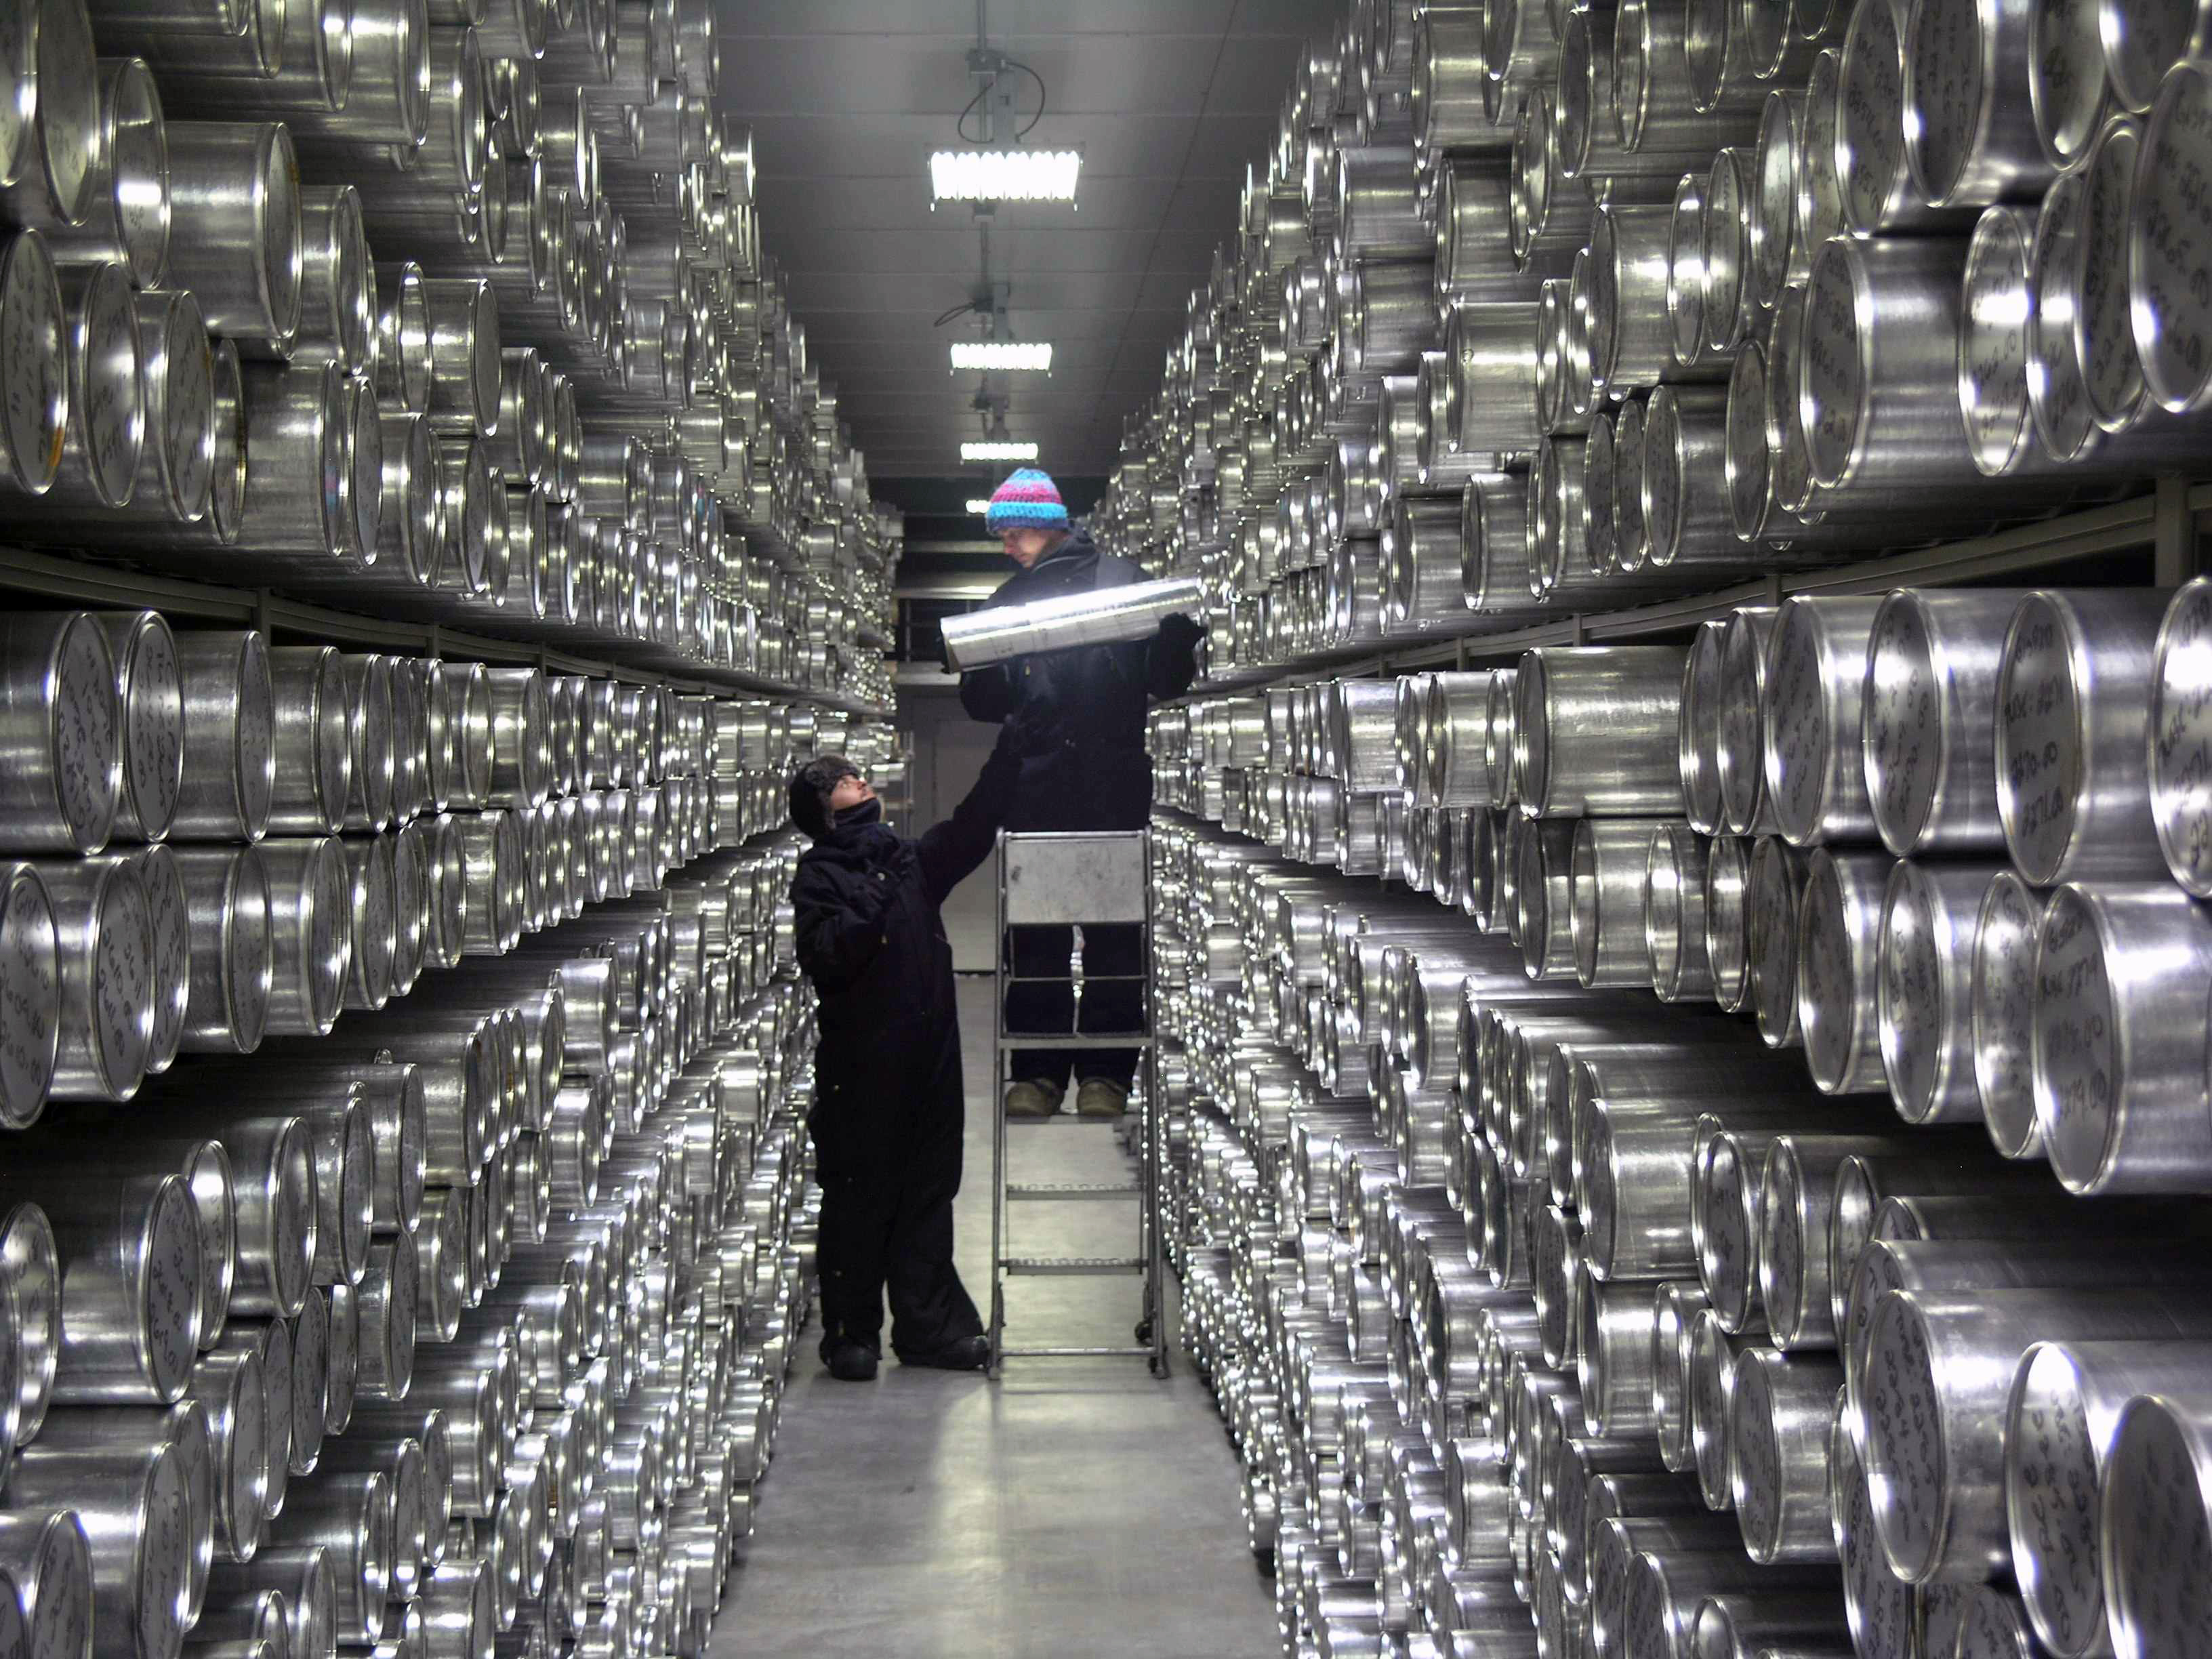 View inside NICL's main archive freezer, which is held at a temperature of -36°C Each silver tube on these shelves contains a 1-meter long section of an ice core